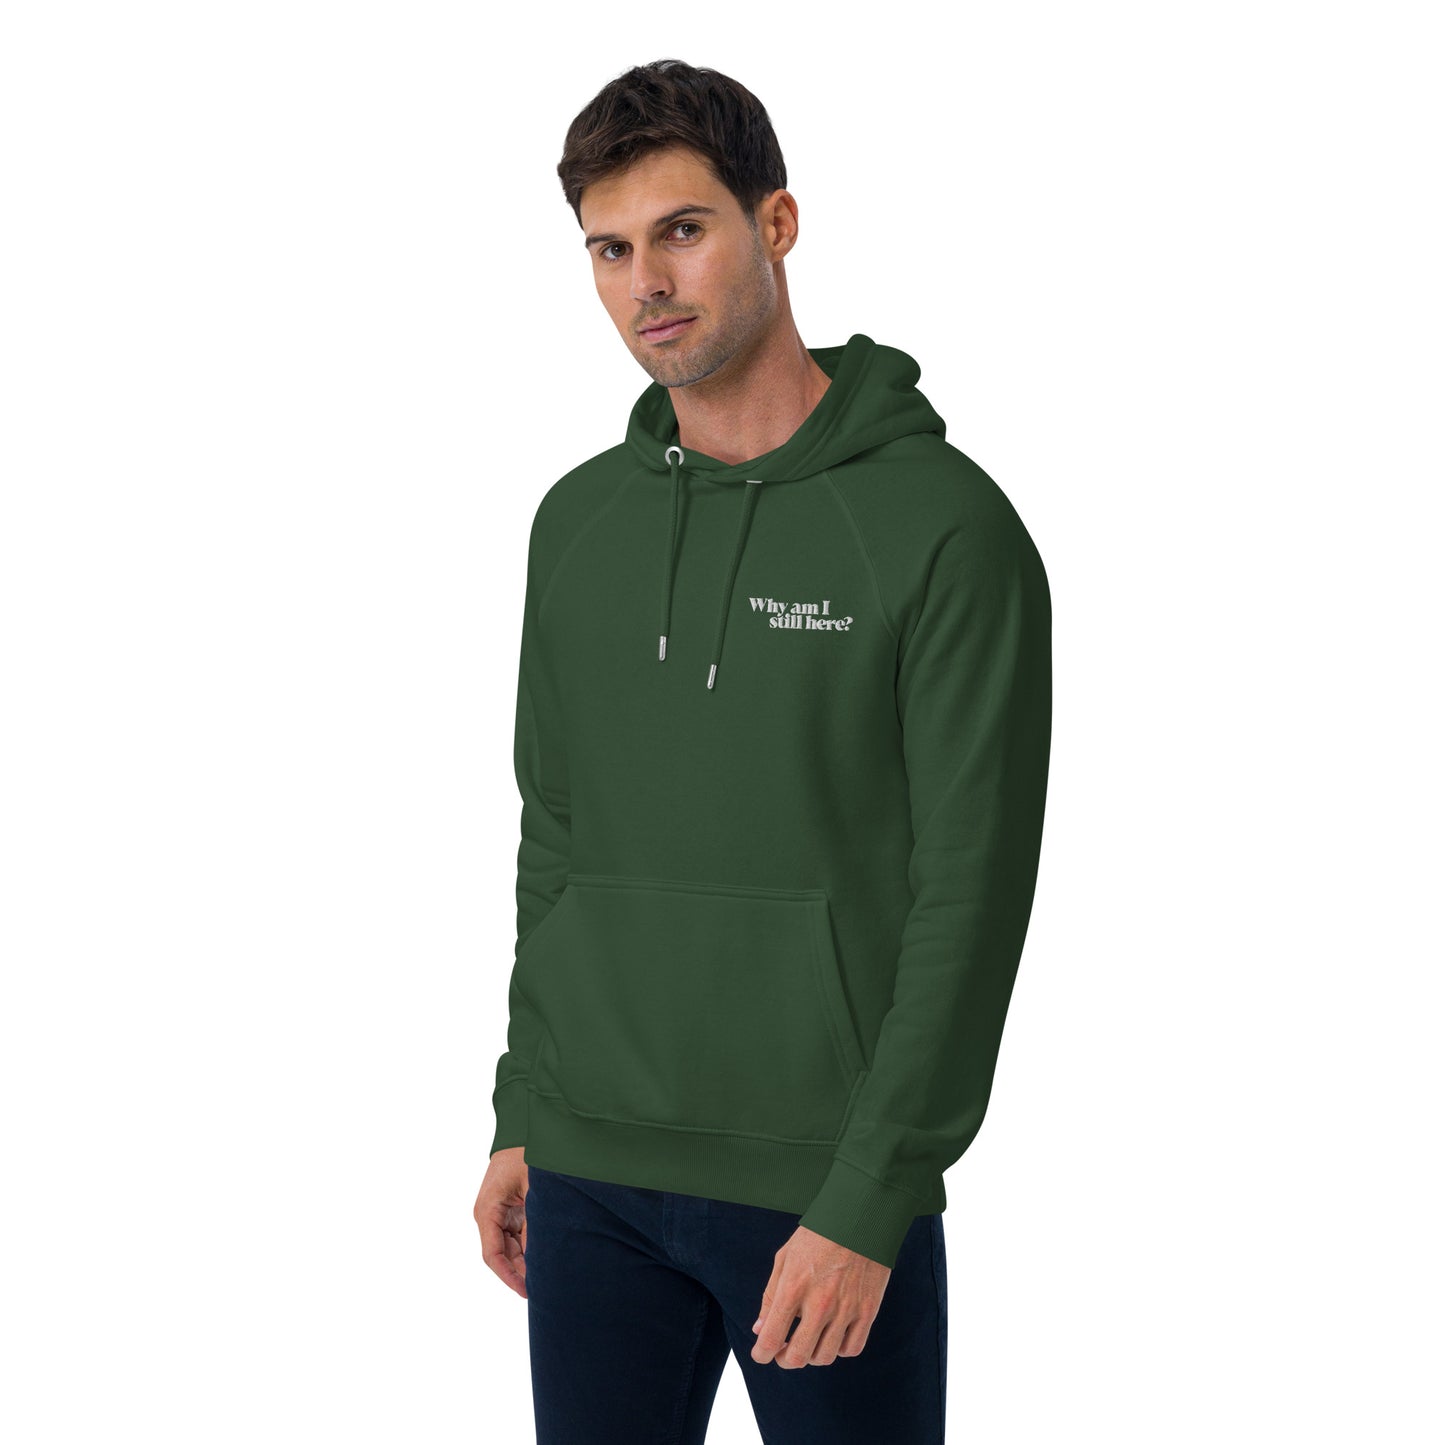 "Why am I still here?" unisex eco hoodie